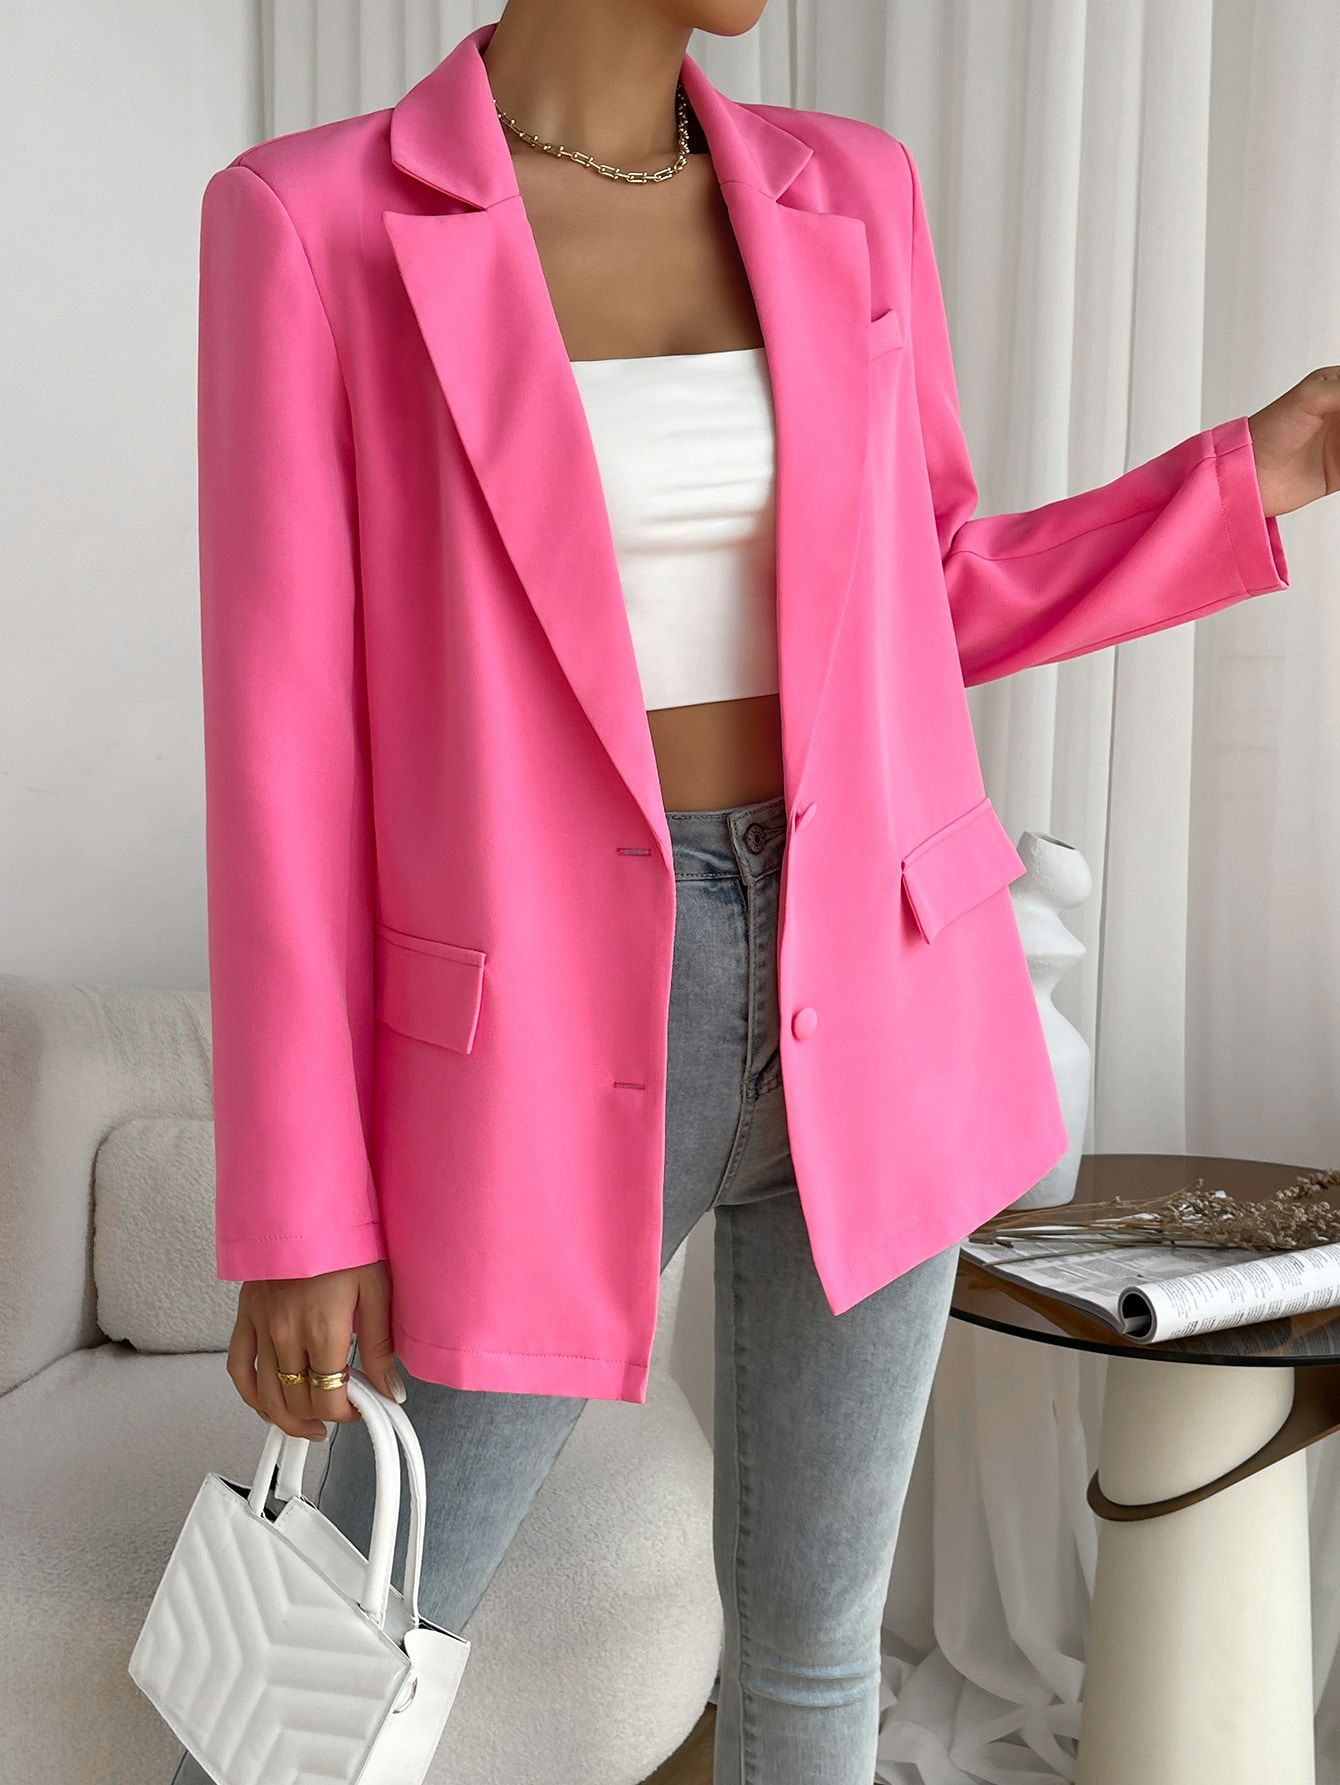 Pink Blazers: Adding a Pop of Color to Your Wardrobe